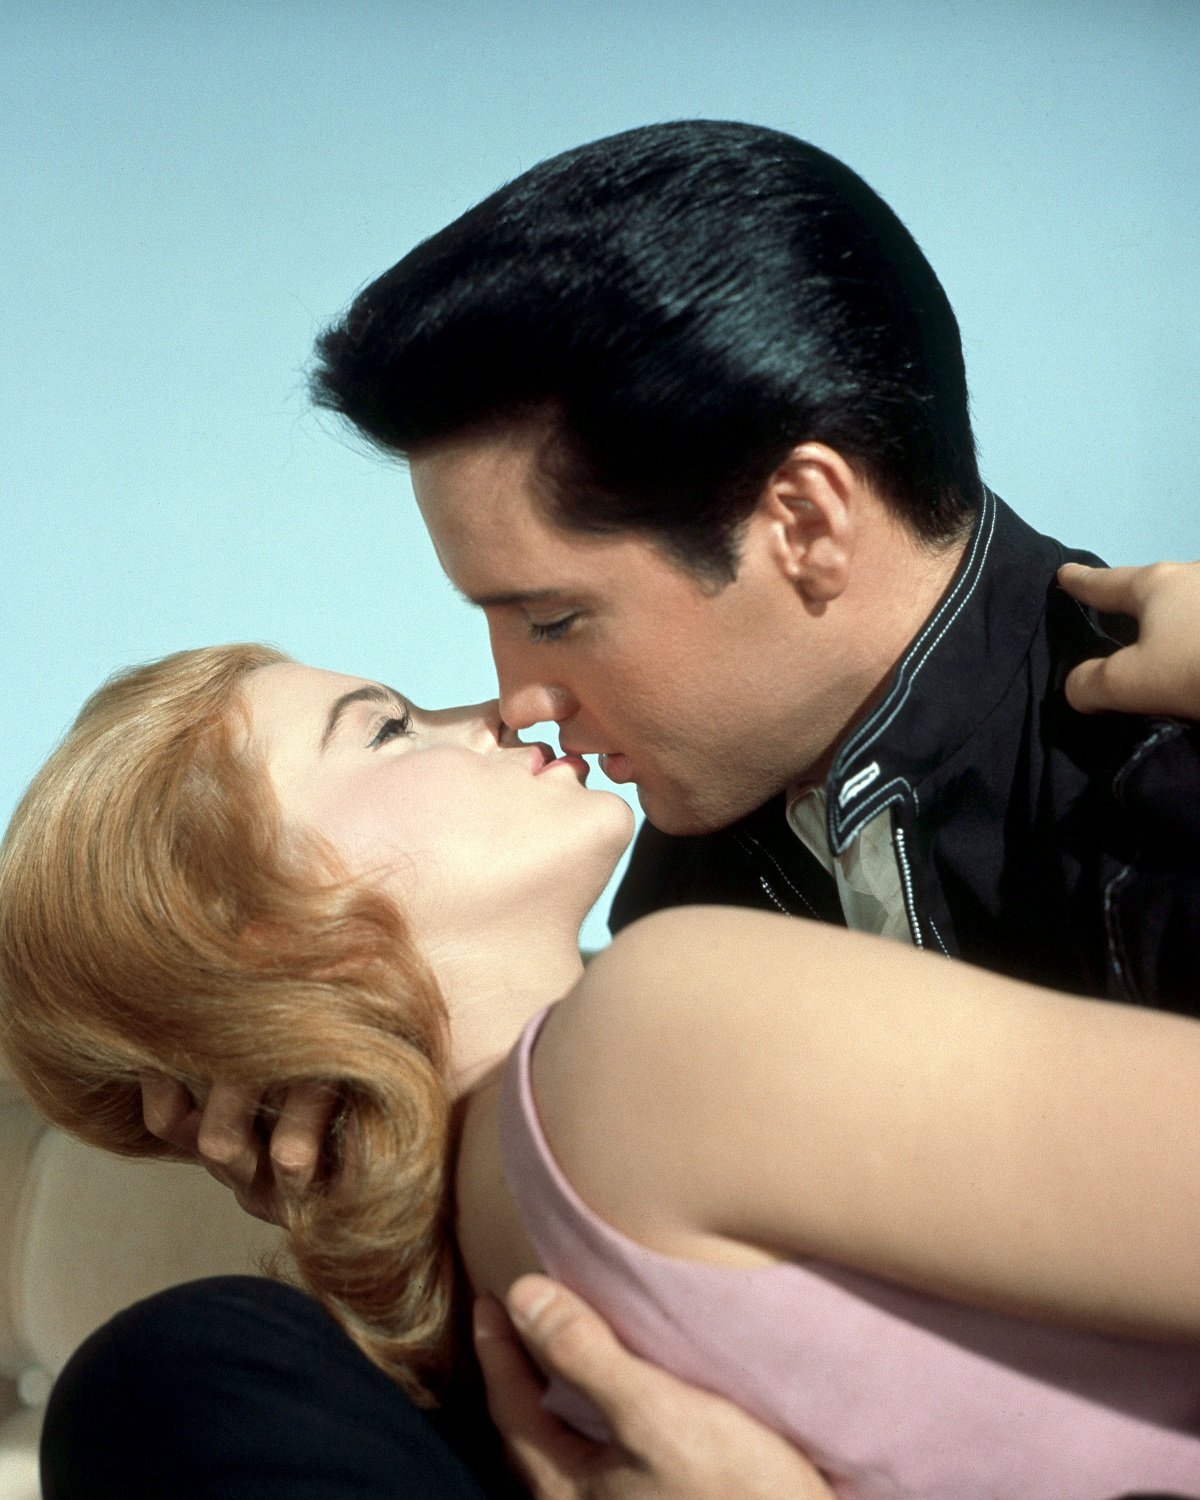 Elvis Presley as Lucky Jackson and Ann-Margret as Rusty Martin in the film 'Viva Las Vegas', 1964 - kissing up-close